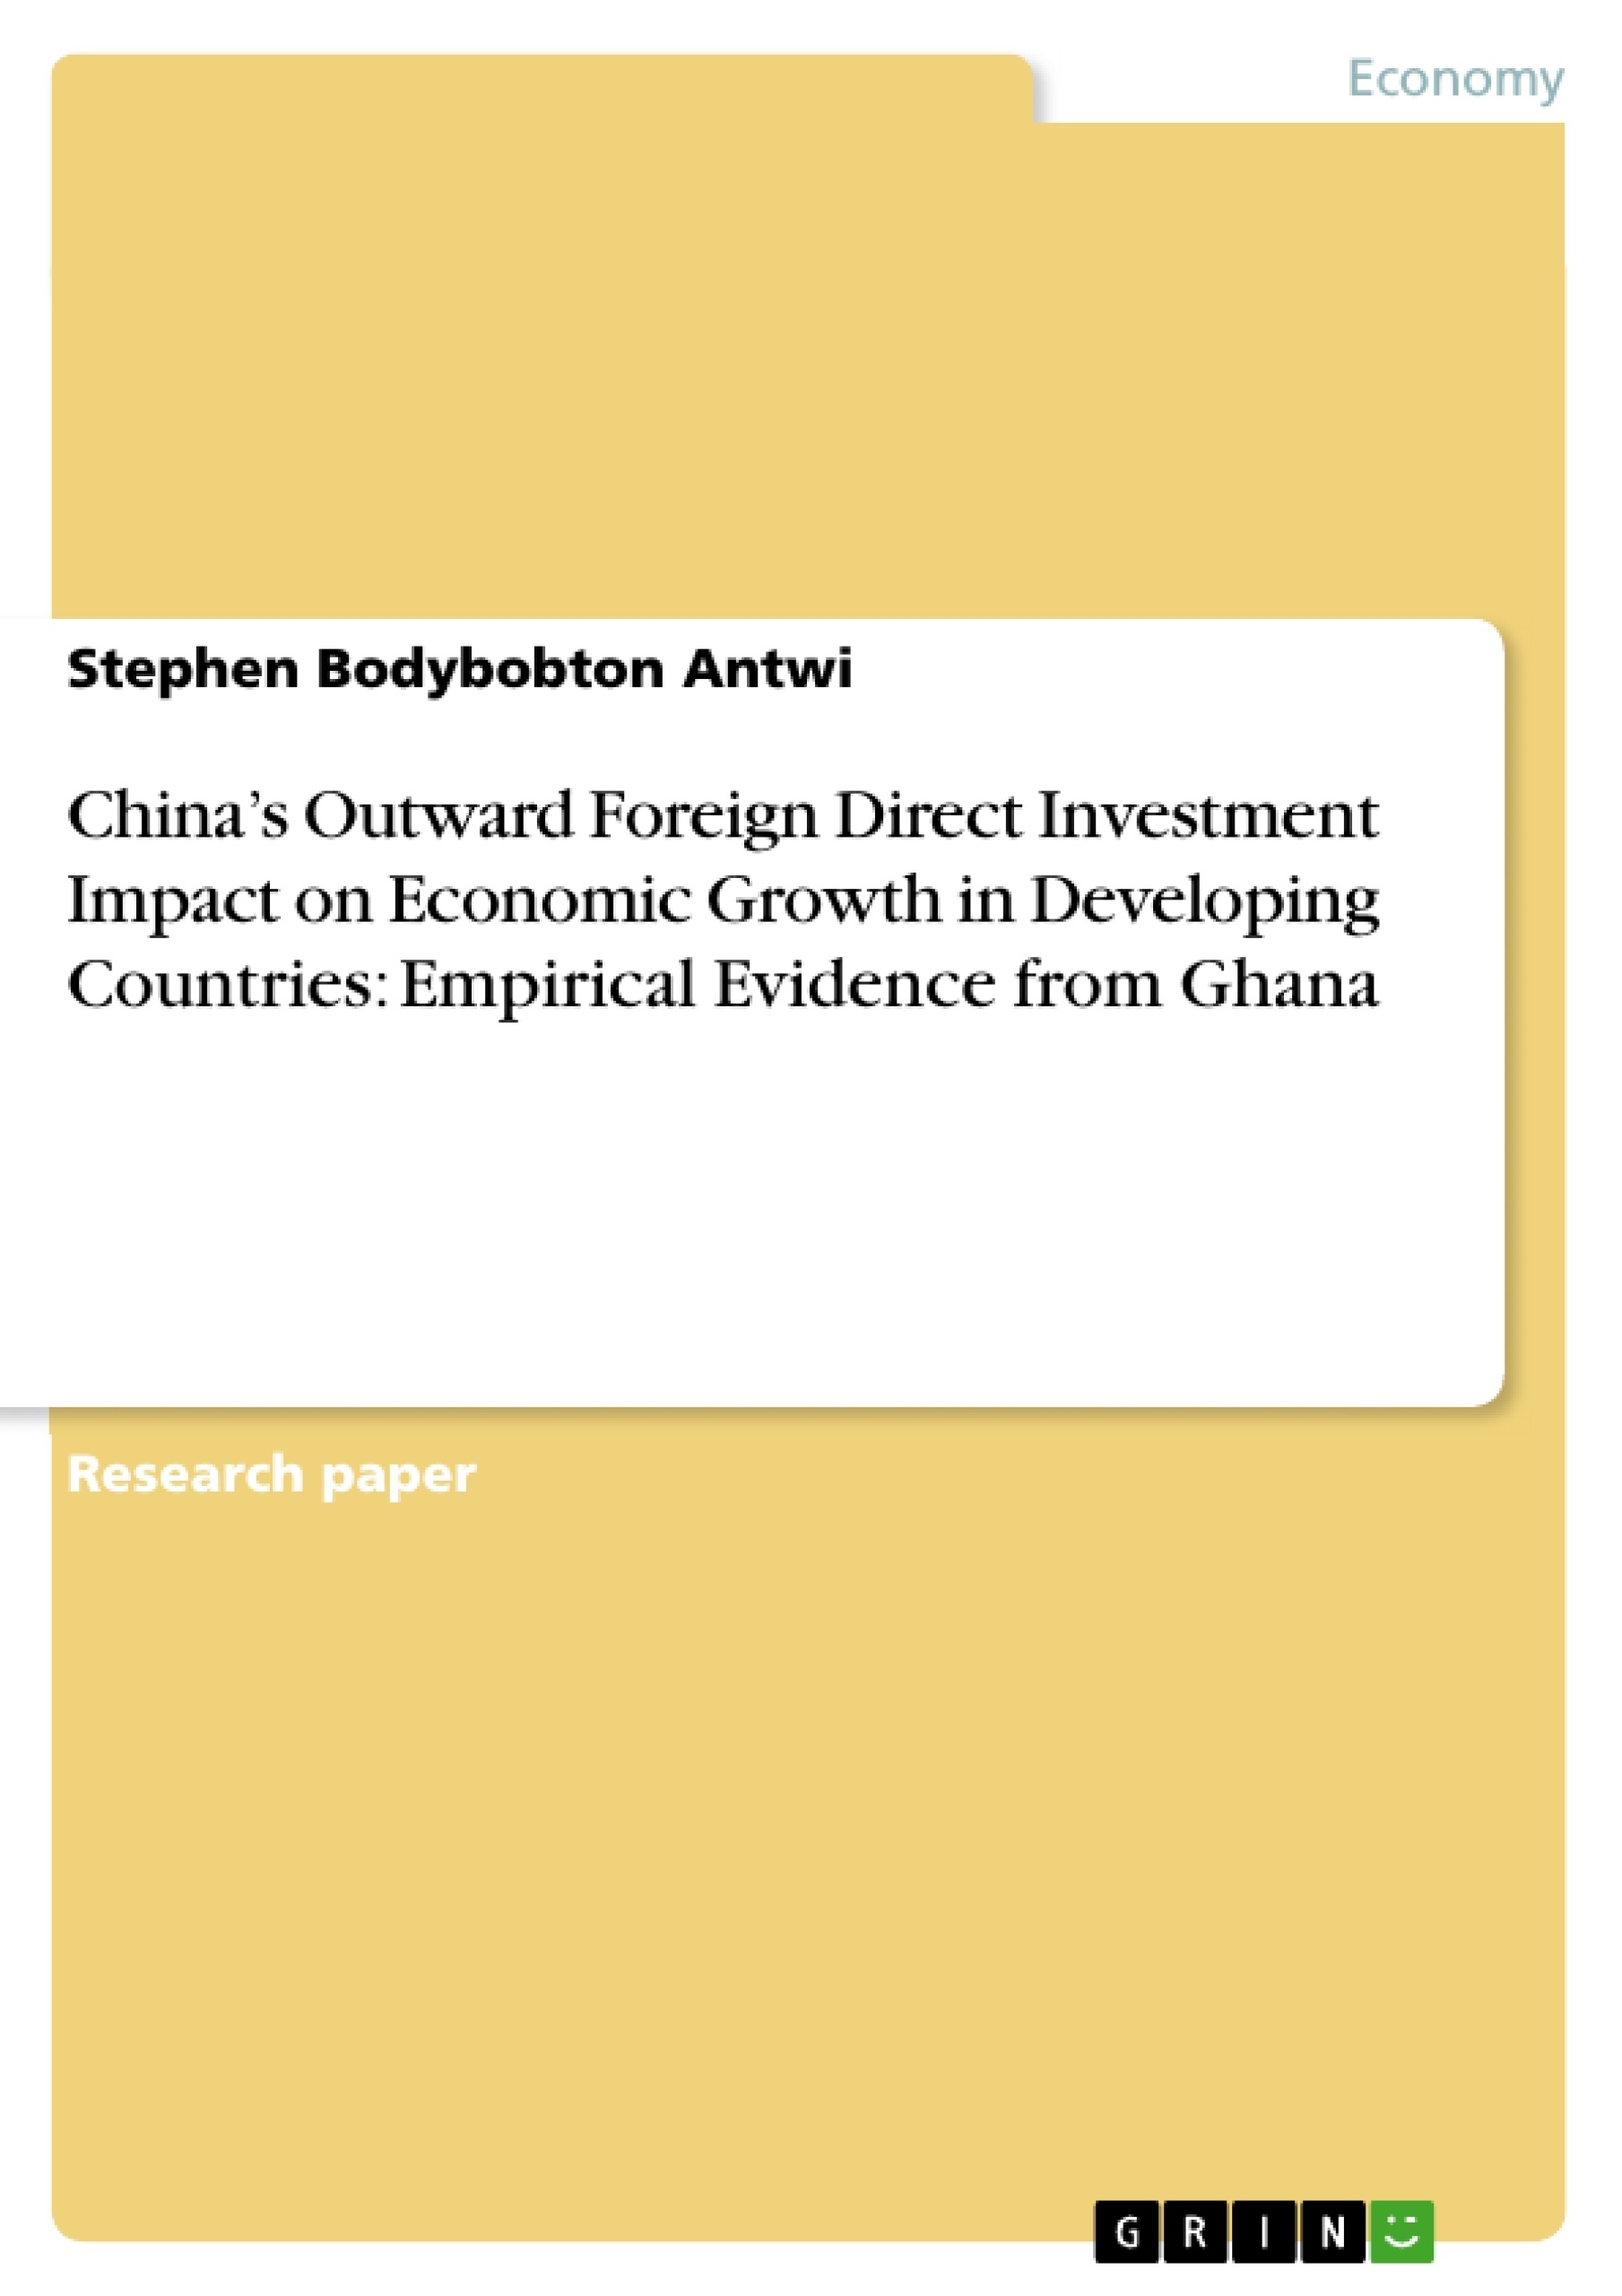 Titre: China’s Outward Foreign Direct Investment Impact on Economic Growth in Developing Countries: Empirical Evidence from Ghana